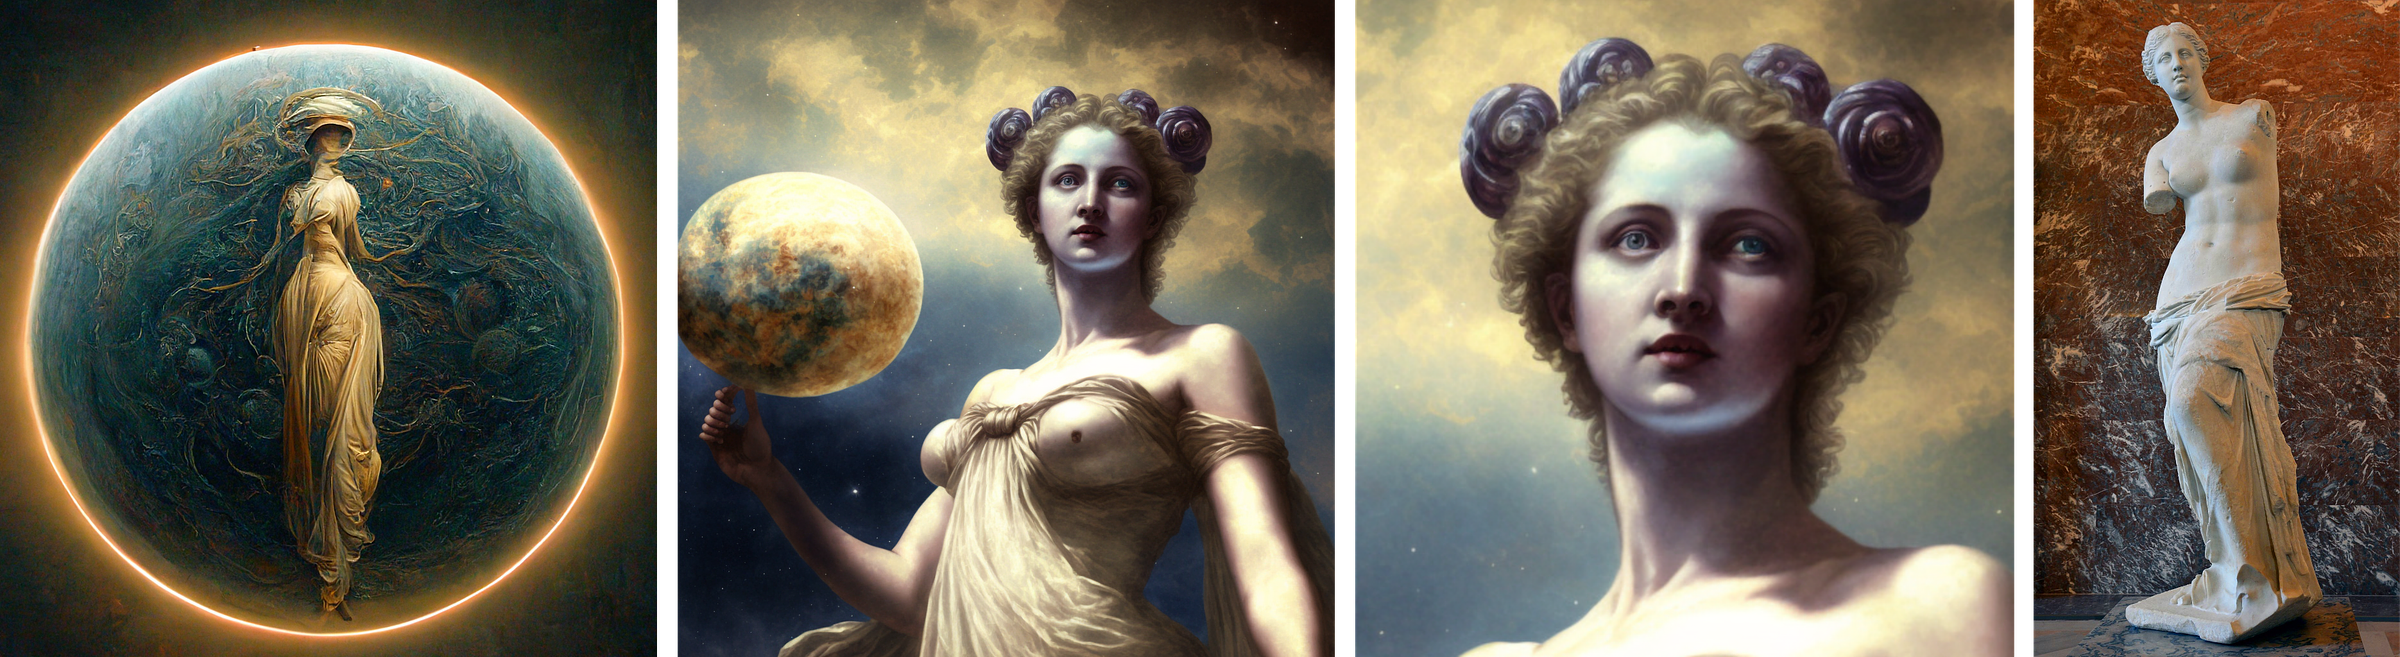 Three images. 1) A loosely rendered female figure with wide hips, no arms, and narrow shoulders and a head with no facial features stands in front of a blue marbled planet. She’s wearing a flowing dress that descends to her feet. 2) A painterly depiction of a woman from the hips up, looking outward past the viewer. She’s wearing a garment that covers her chest and wraps around her left upper arm. Her shoulders and neck are bare. She has a pleasant neutral expression, and her face resembles the Venus de Milo, especially her brow and nose and turned head. In her right hand, which has too many fingers, she holds a planet. 3) A close up of her face. 4) A photo the Venus de Milo, an ancient Greek sculpture of damaged, age-worn marble depicting a woman standing upright with a slightly twisted pose, looking to one side with a pleasant neutral expression. A loose garment wraps around her waist conceals her legs. From the waist up, she is nude. Her arms are missing. Her pose is somewhat unnatural and mysterious.